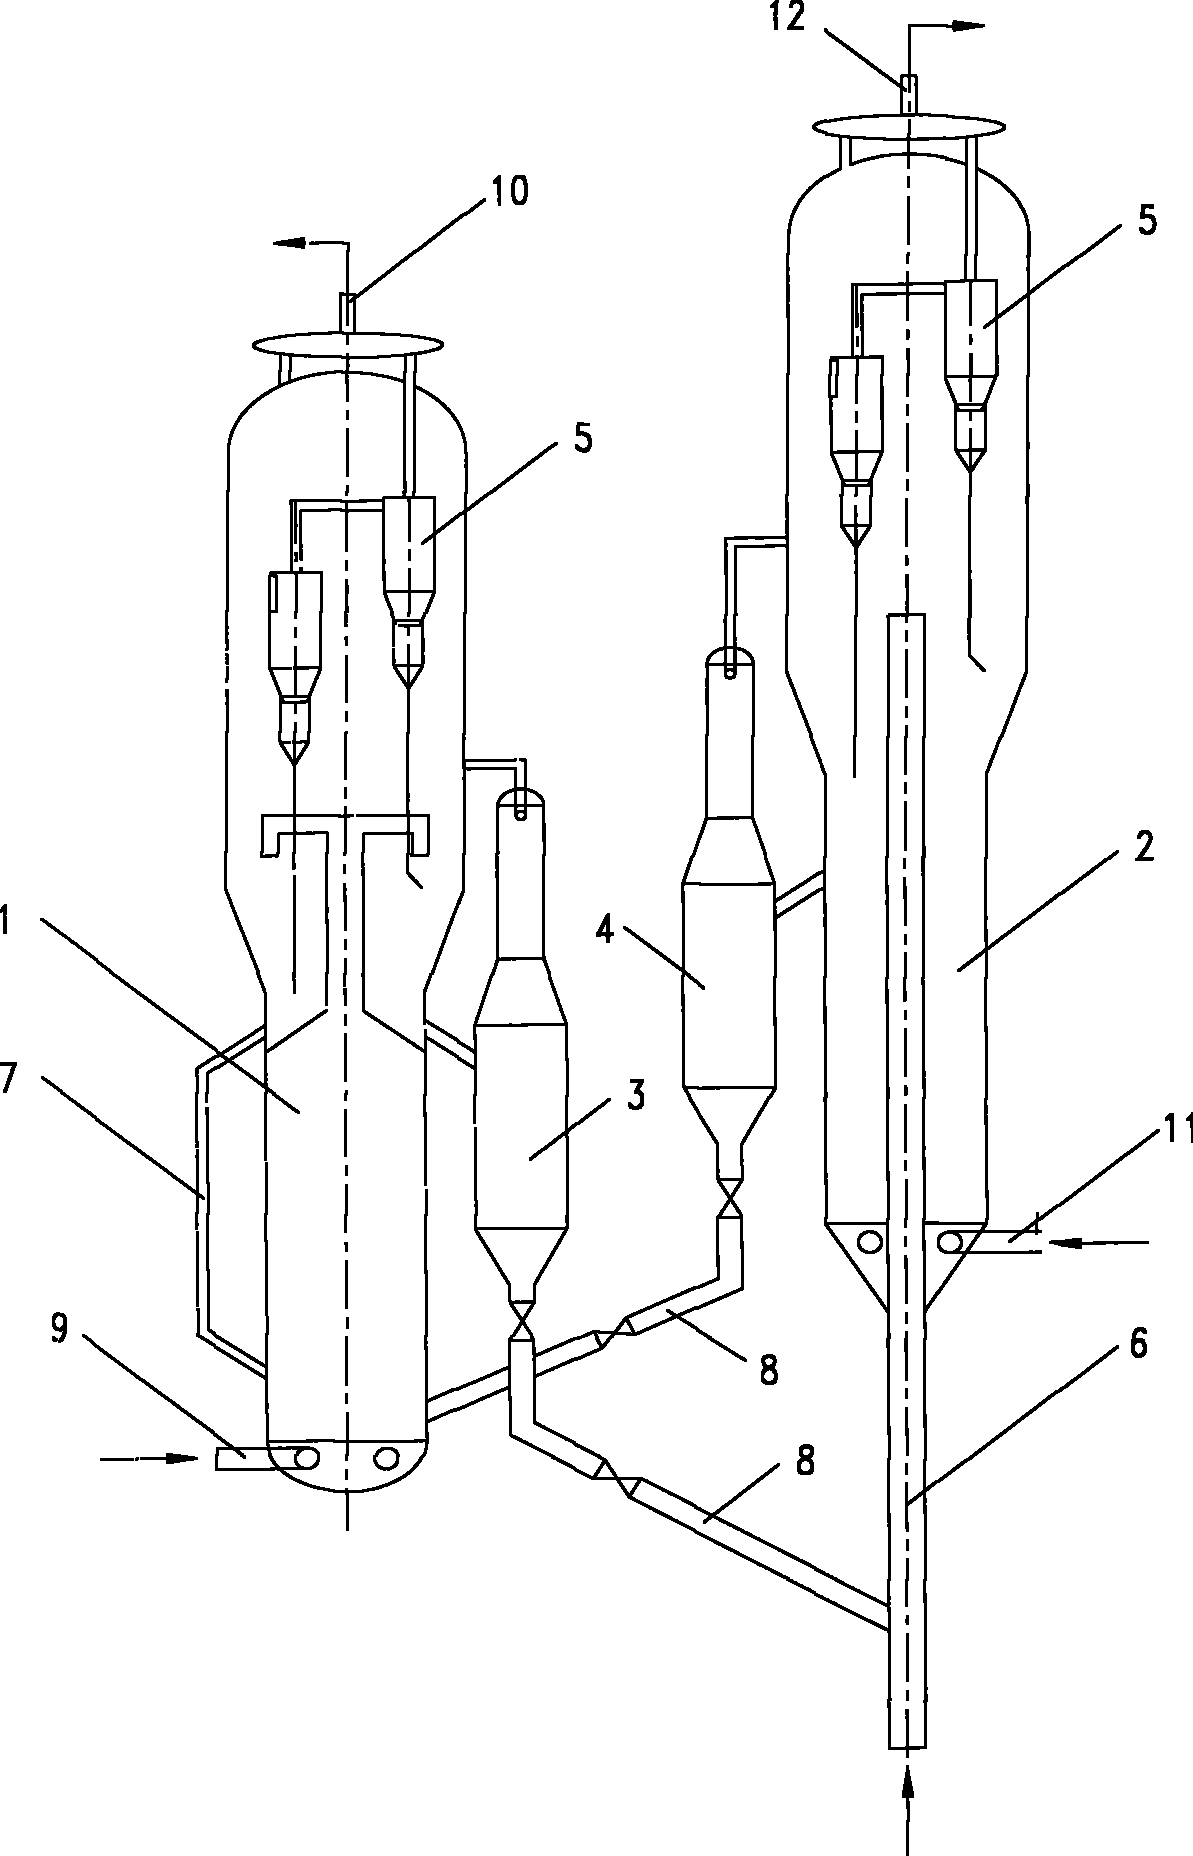 Method for preparing low-carbon olefin hydrocarbon with oxocompound